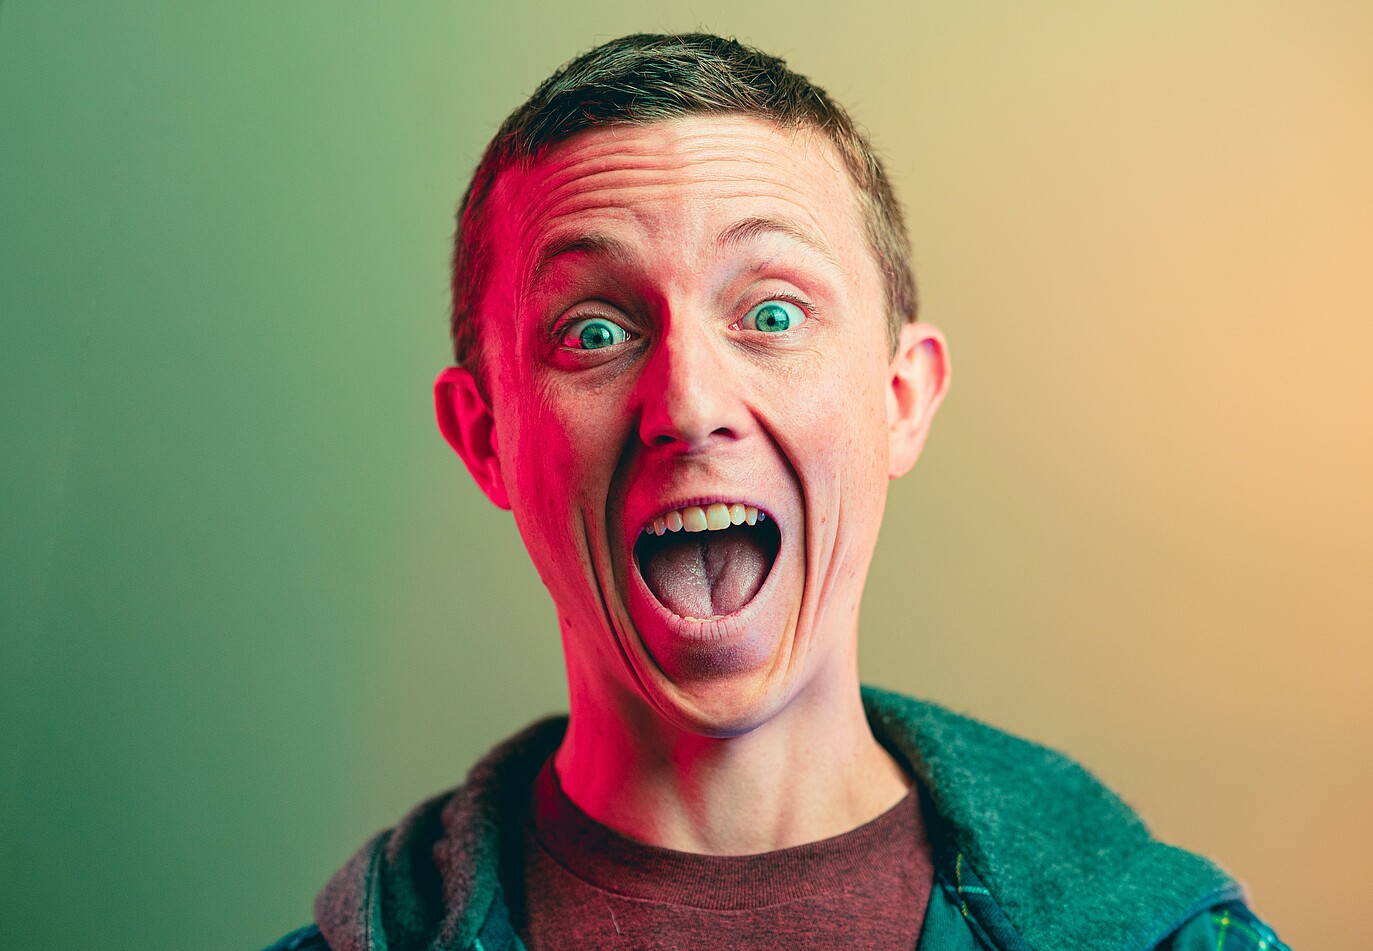 Photo shows a surprised or angry man with the yellow and green background